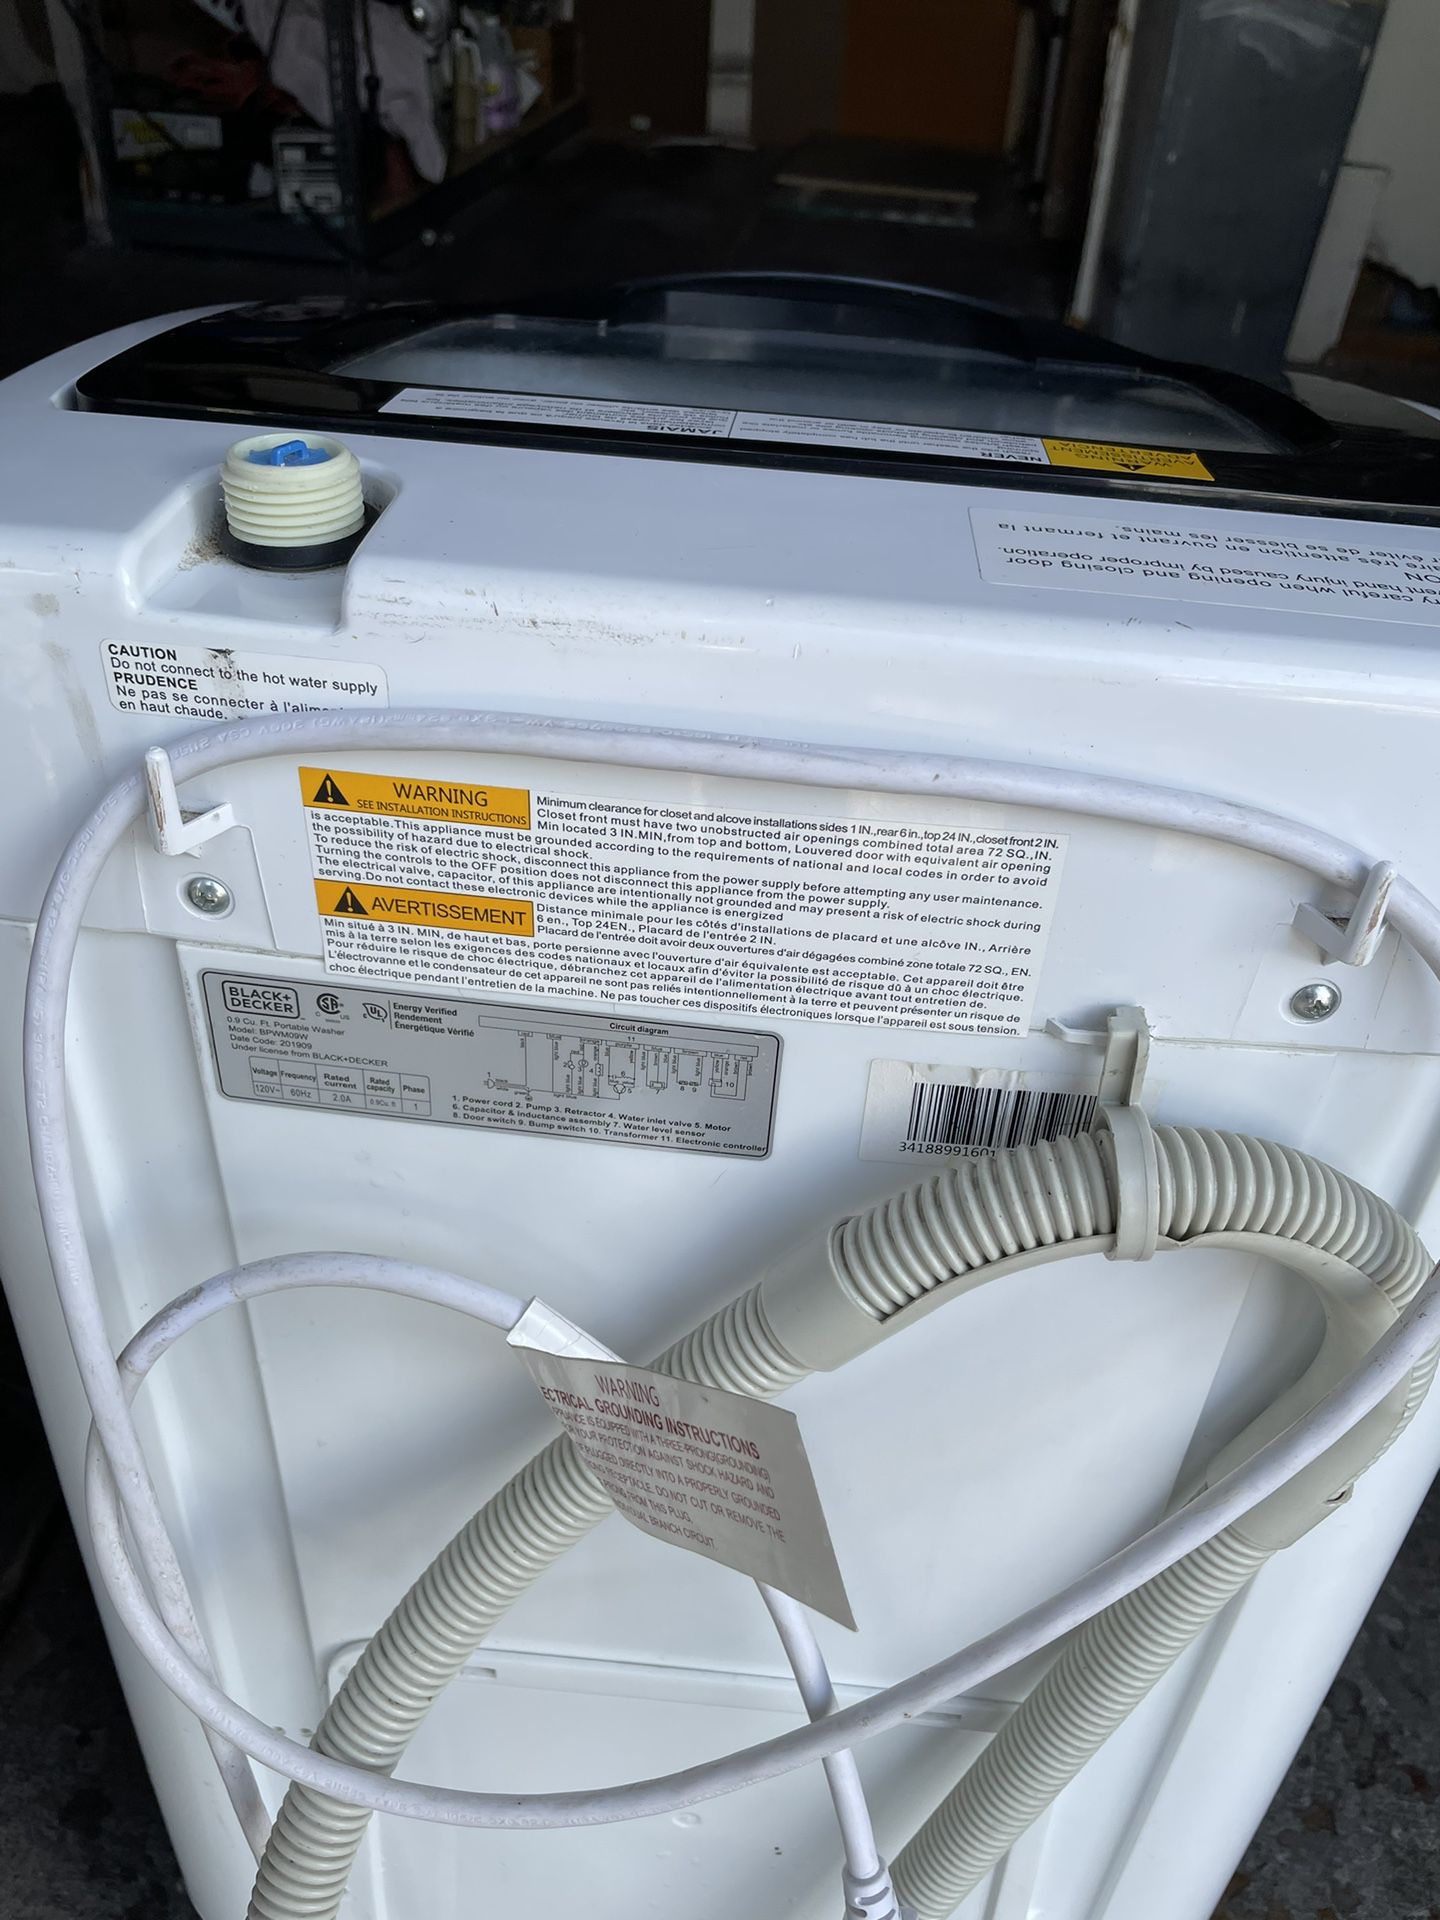 Black And Decker Portable Washer for Sale in Surprise, AZ - OfferUp